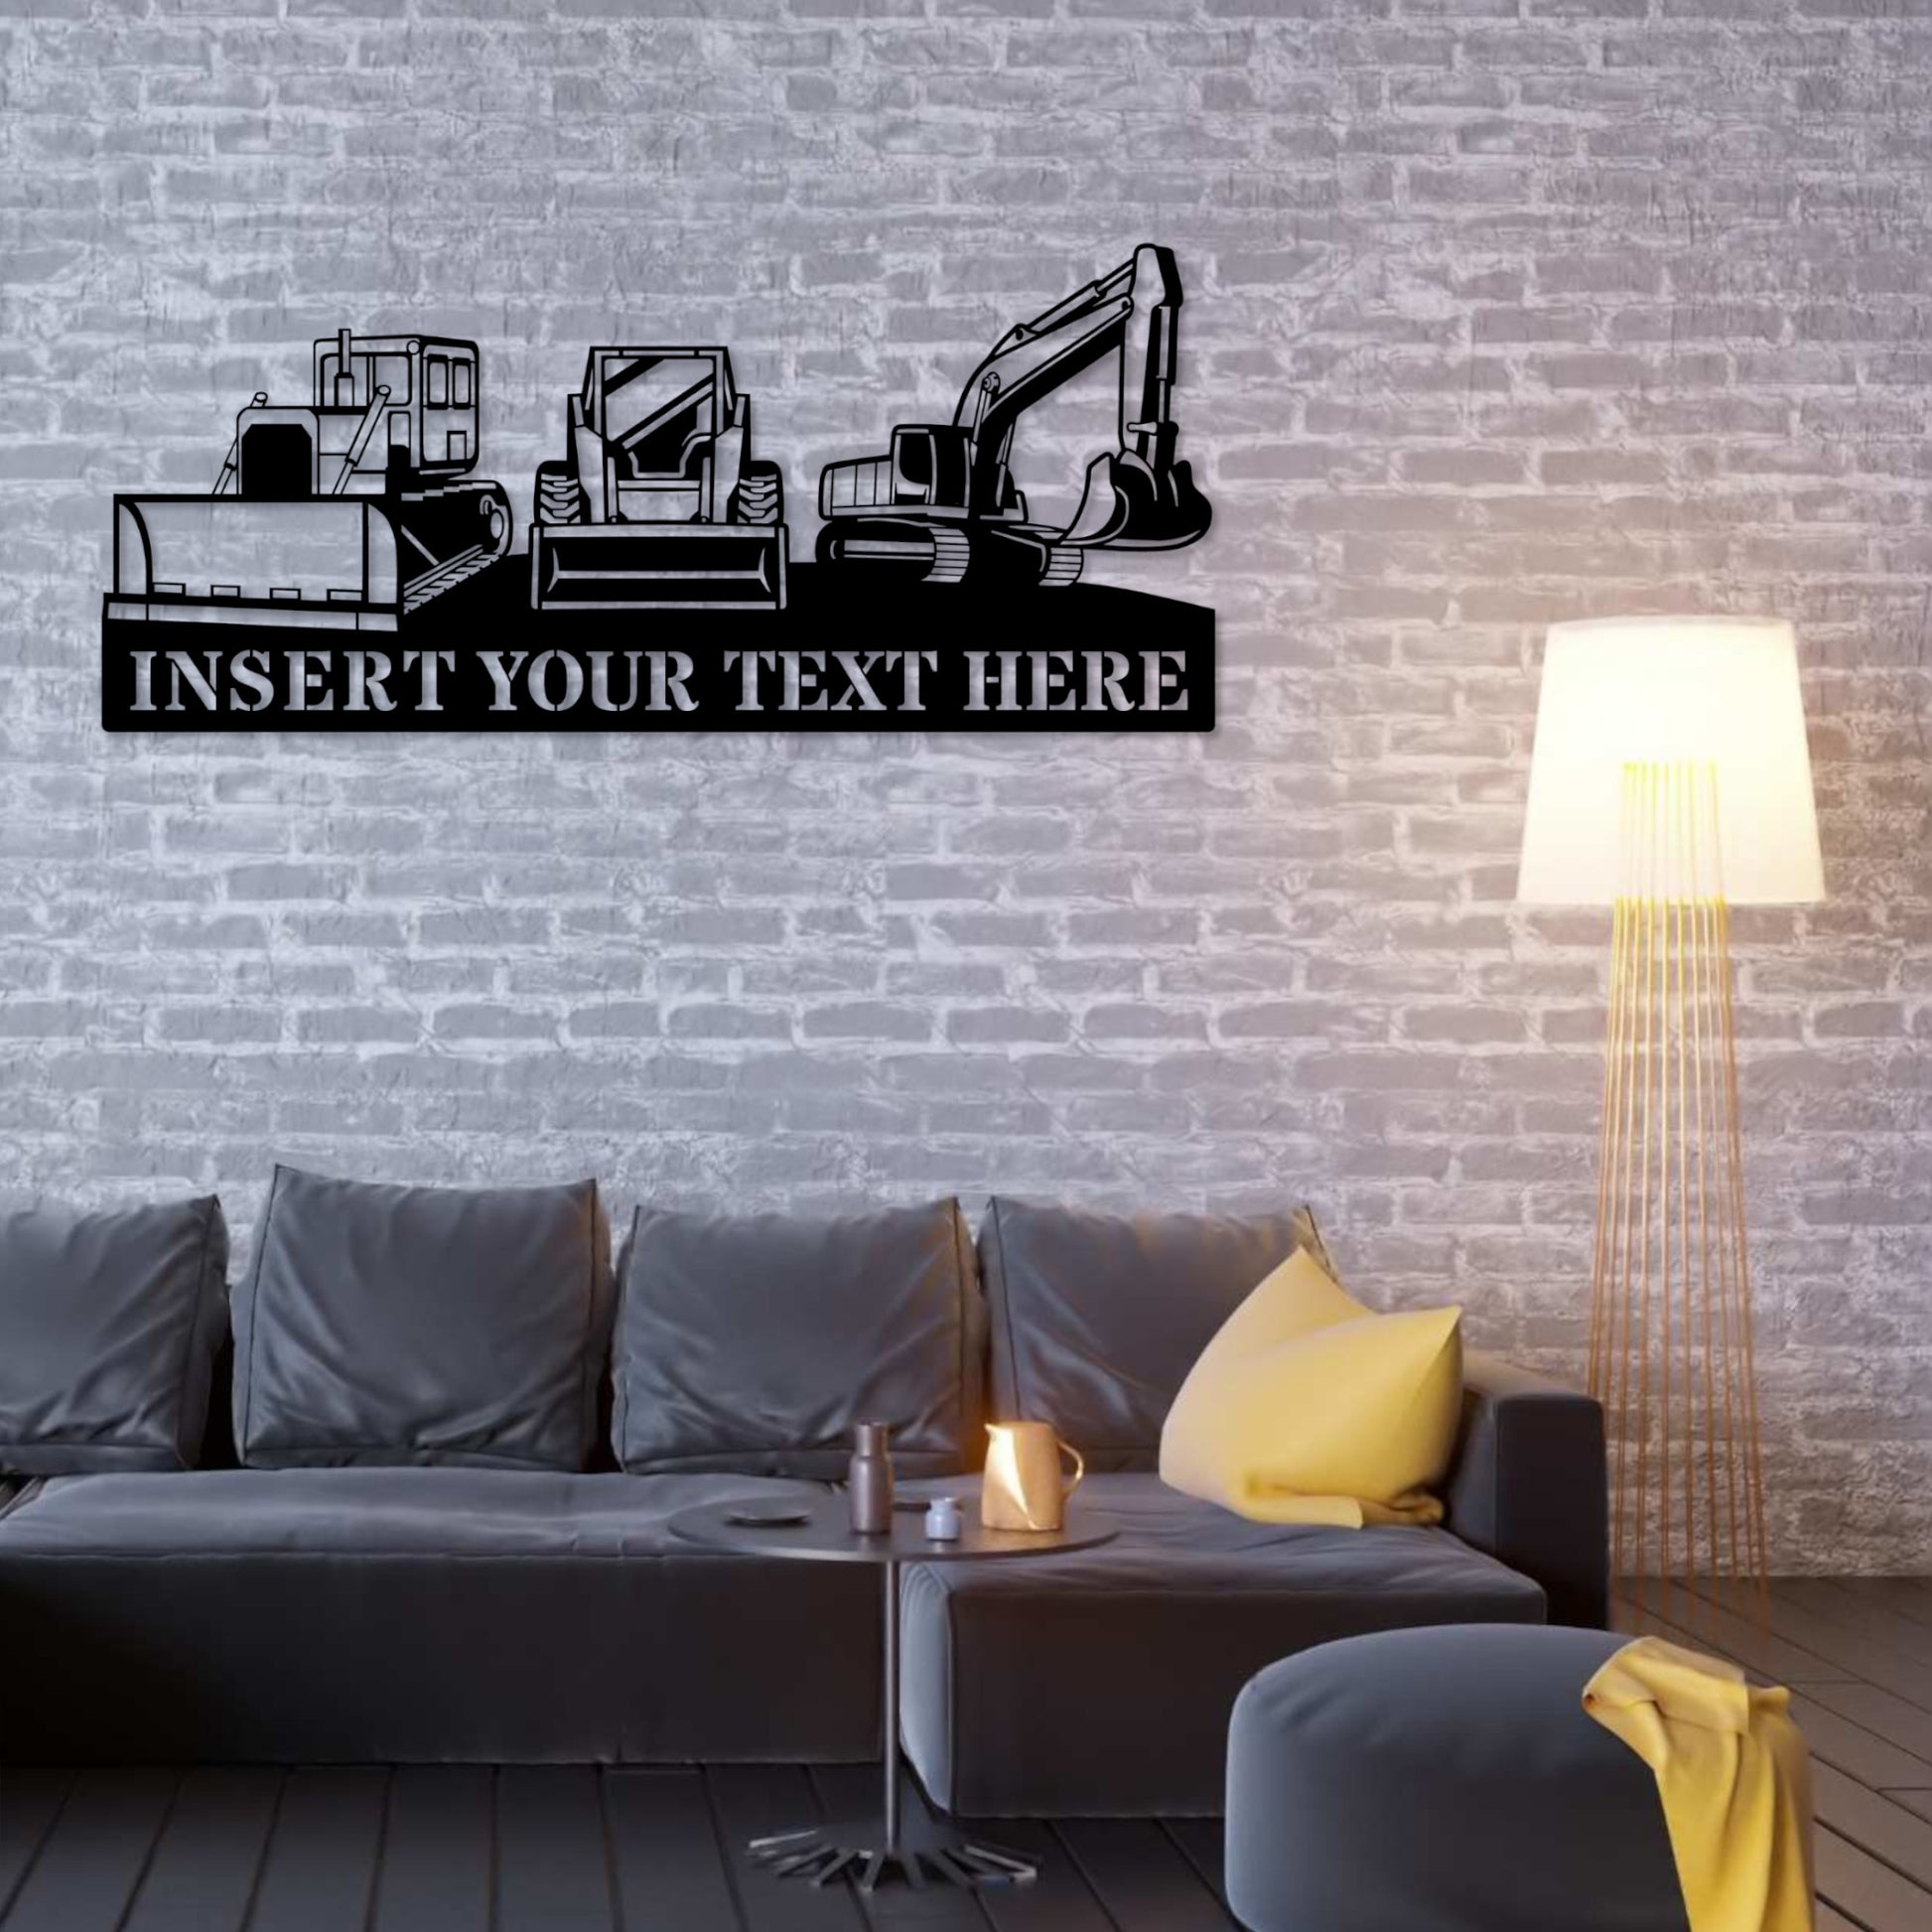 Personalized Construction Machinery Metal Sign. Custom Heavy Equipment Wall Decor Gift. Machine Operator Wall Hanging. Garage Sign Present